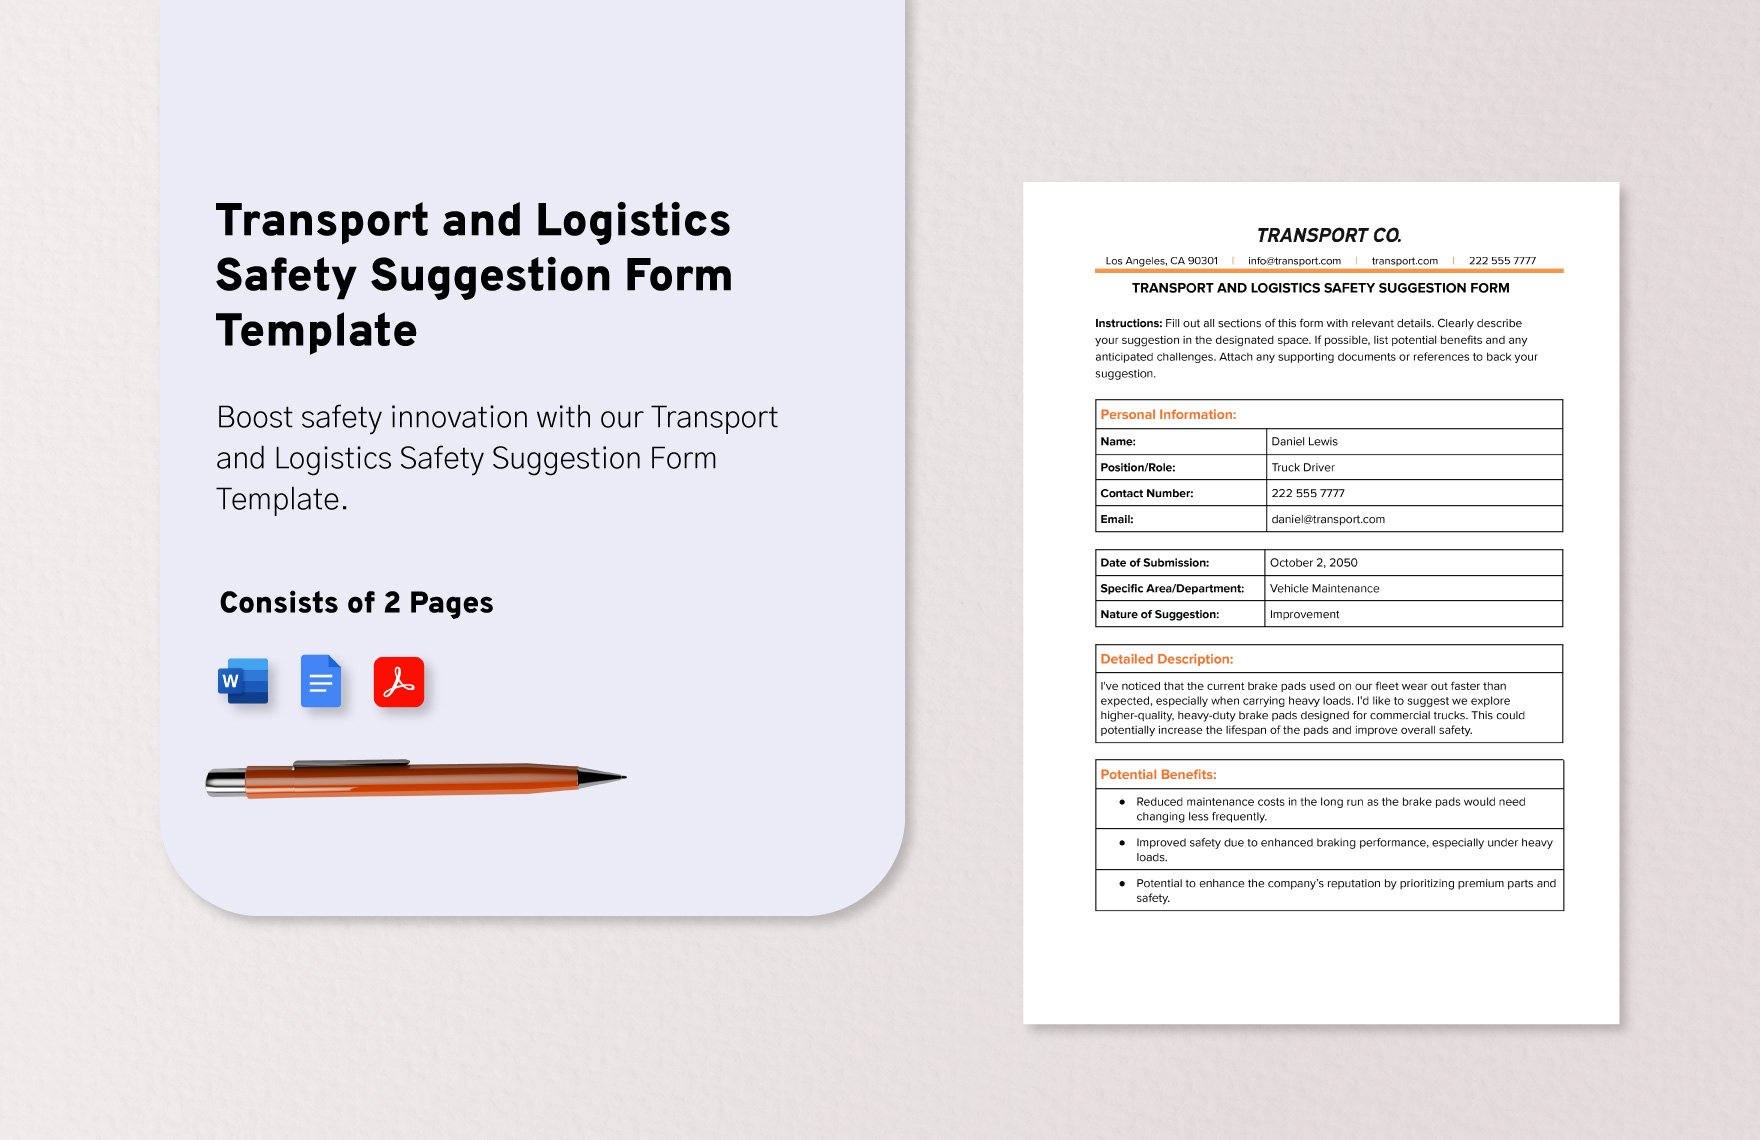 Transport and Logistics Safety Suggestion Form Template